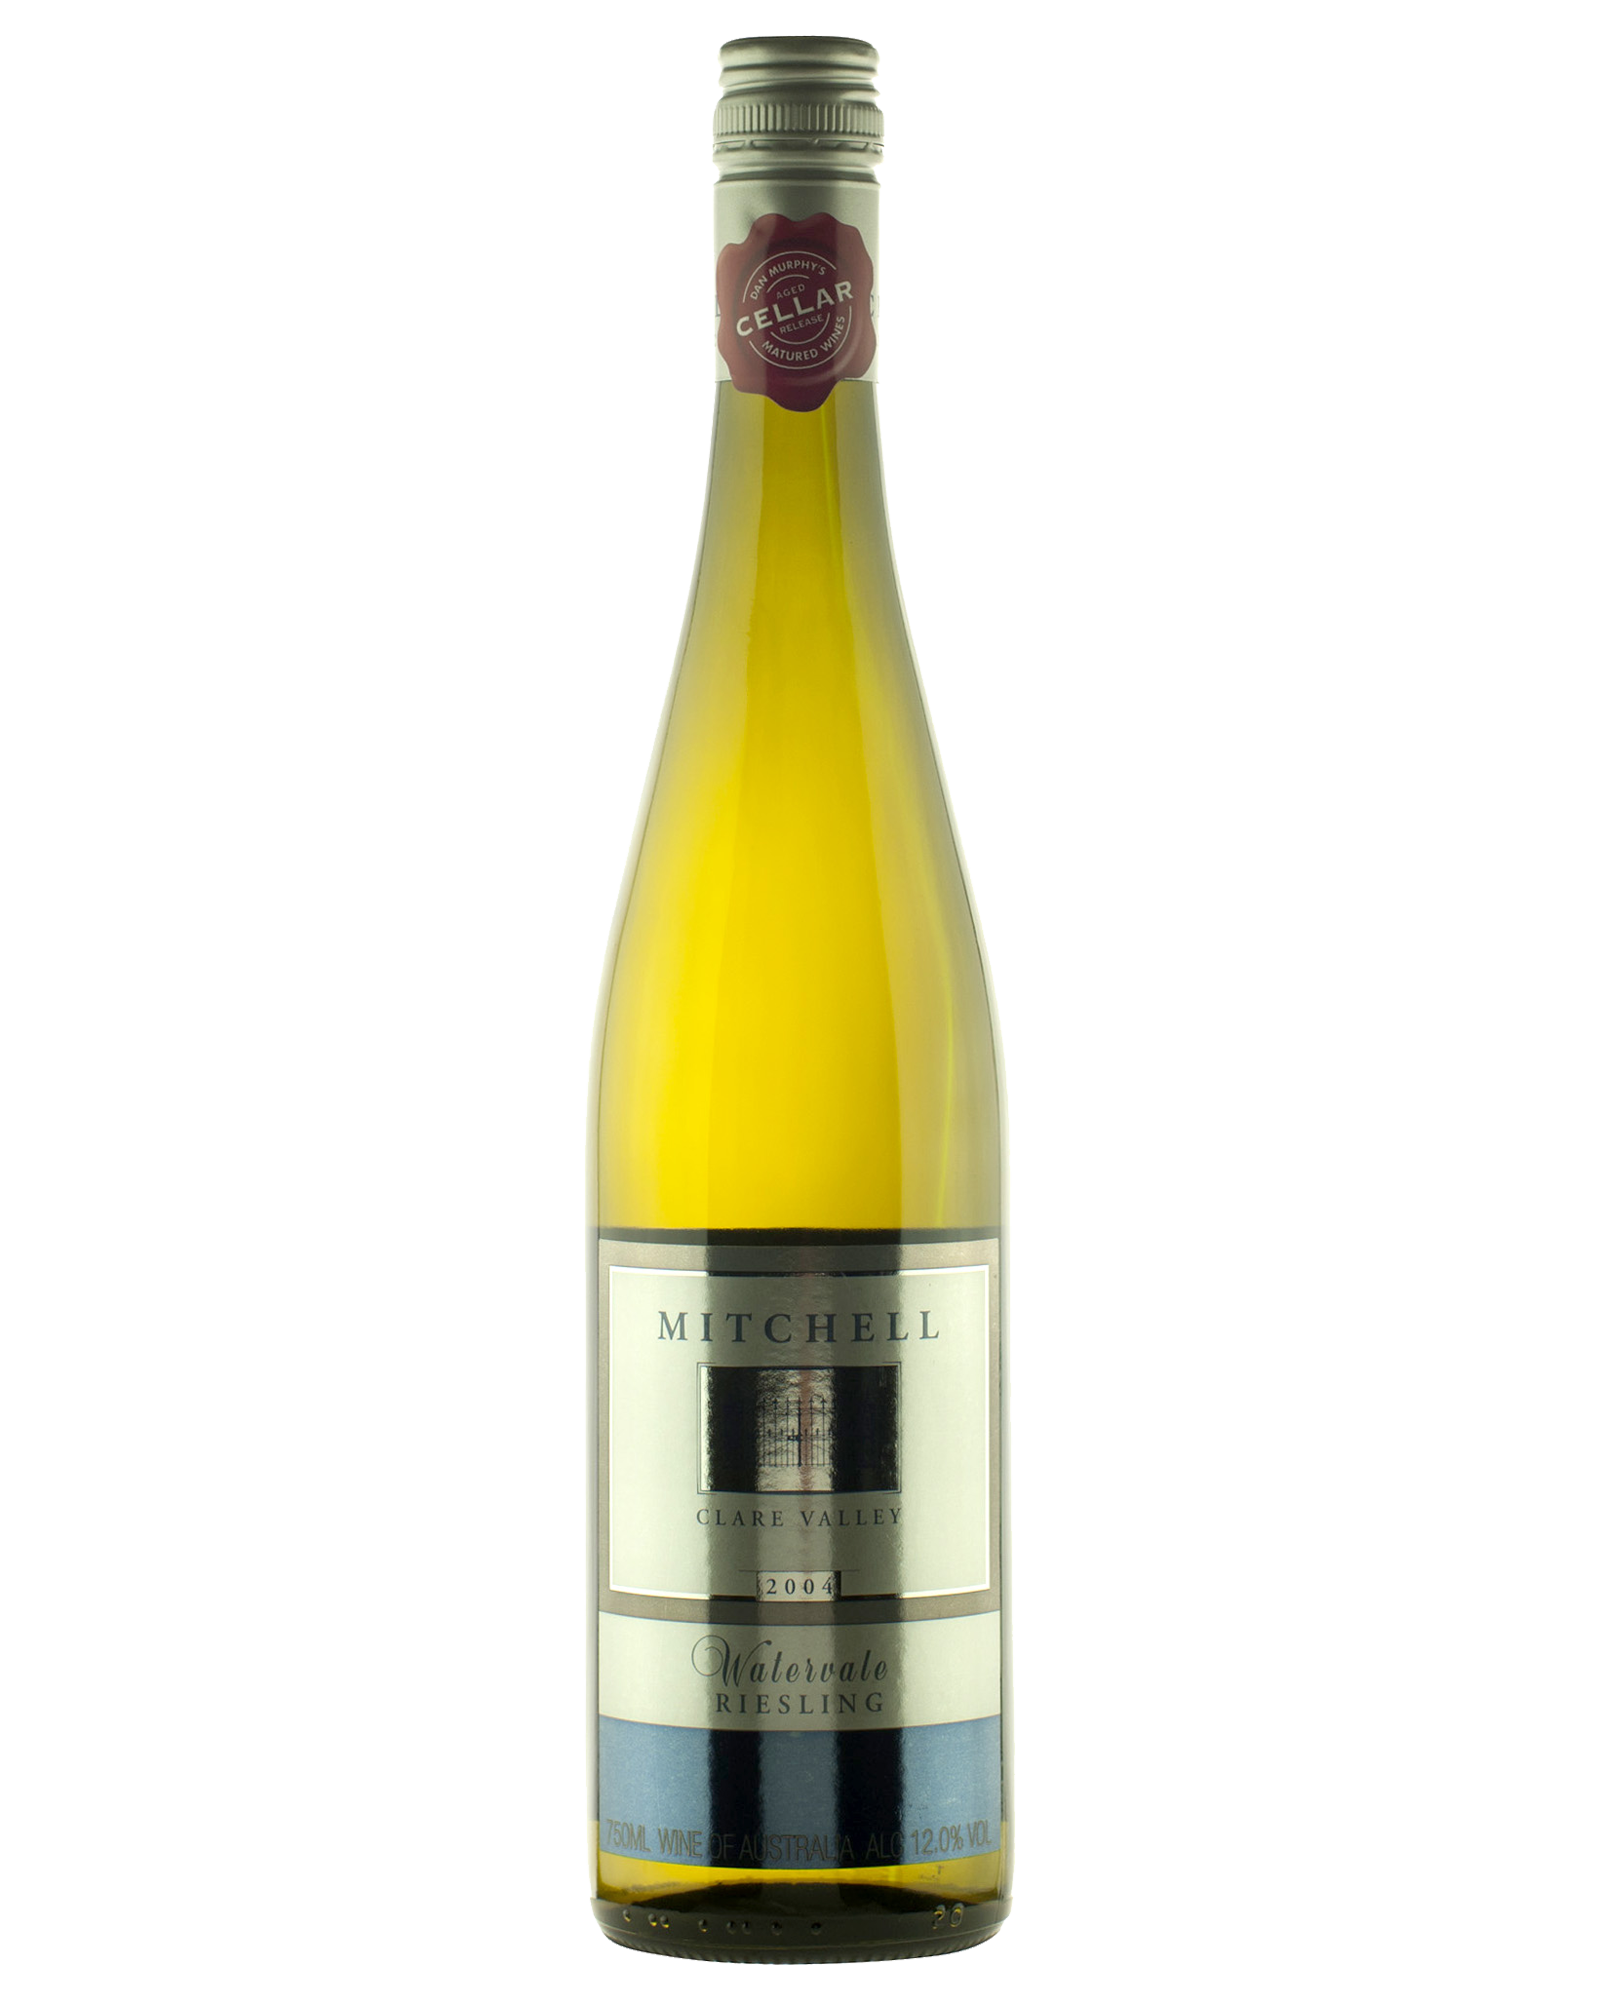 Mitchell Riesling 2004